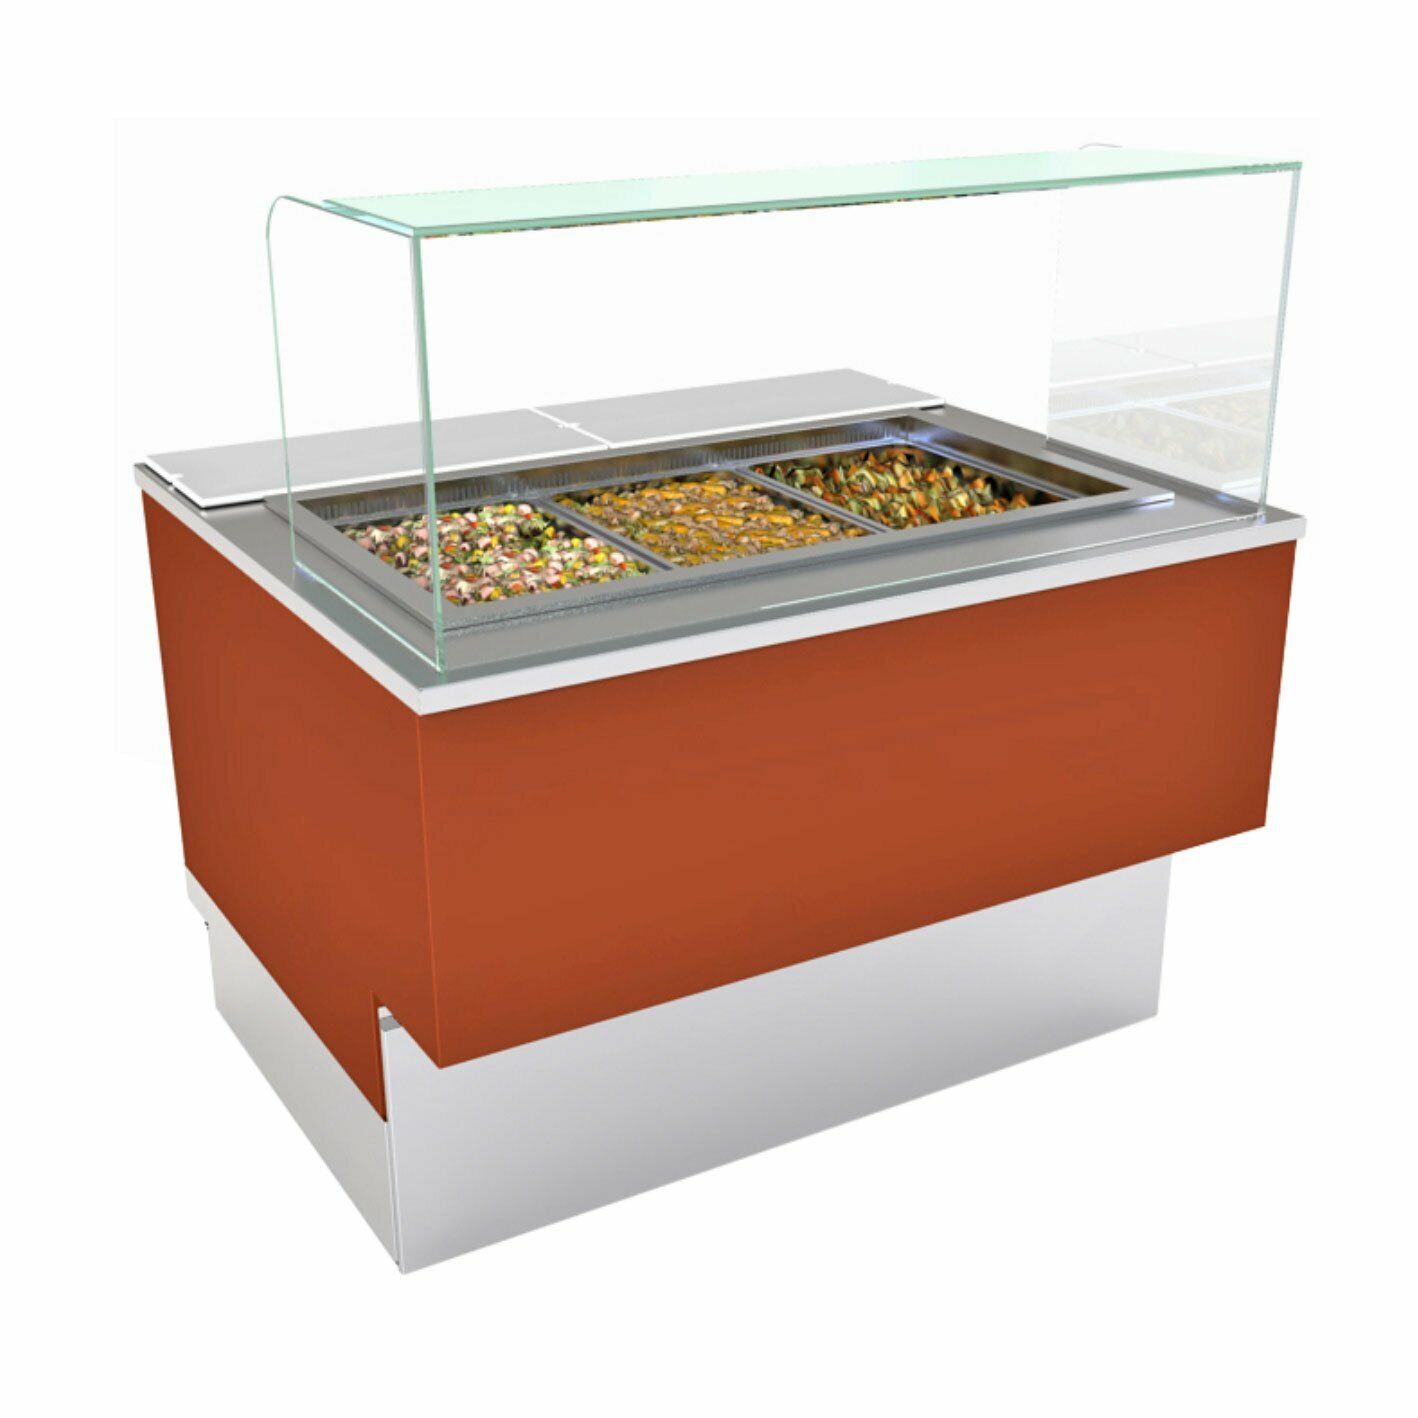 Structural Concepts Fb3s-2r 37" Grocerant Inline Service Refrigerated Display...